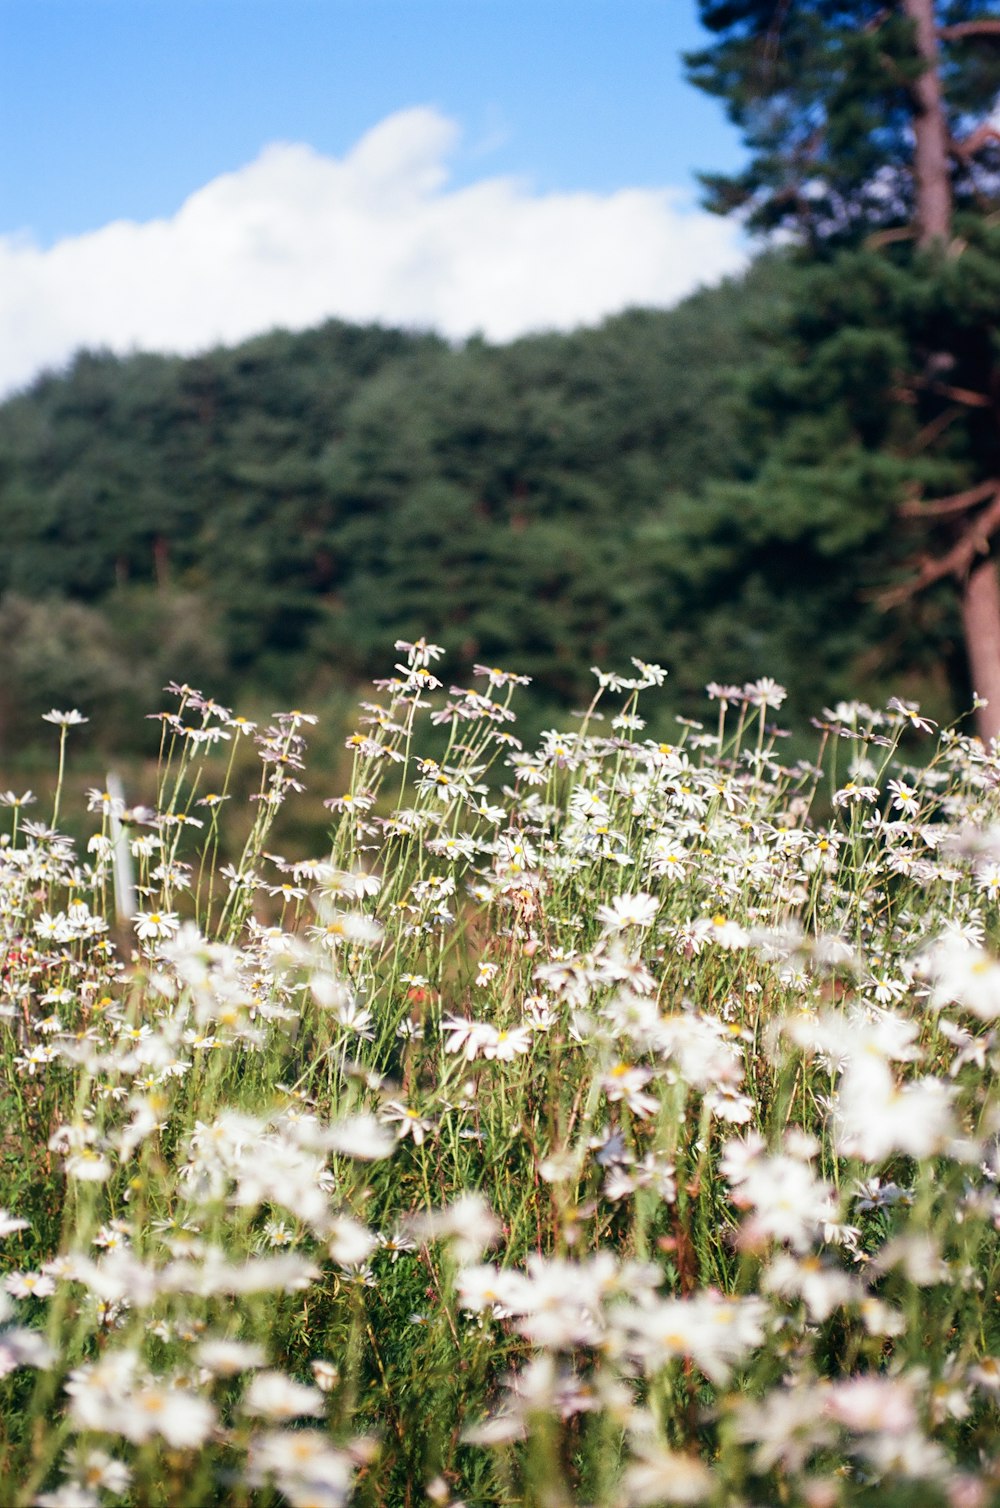 a field full of white flowers with trees in the background